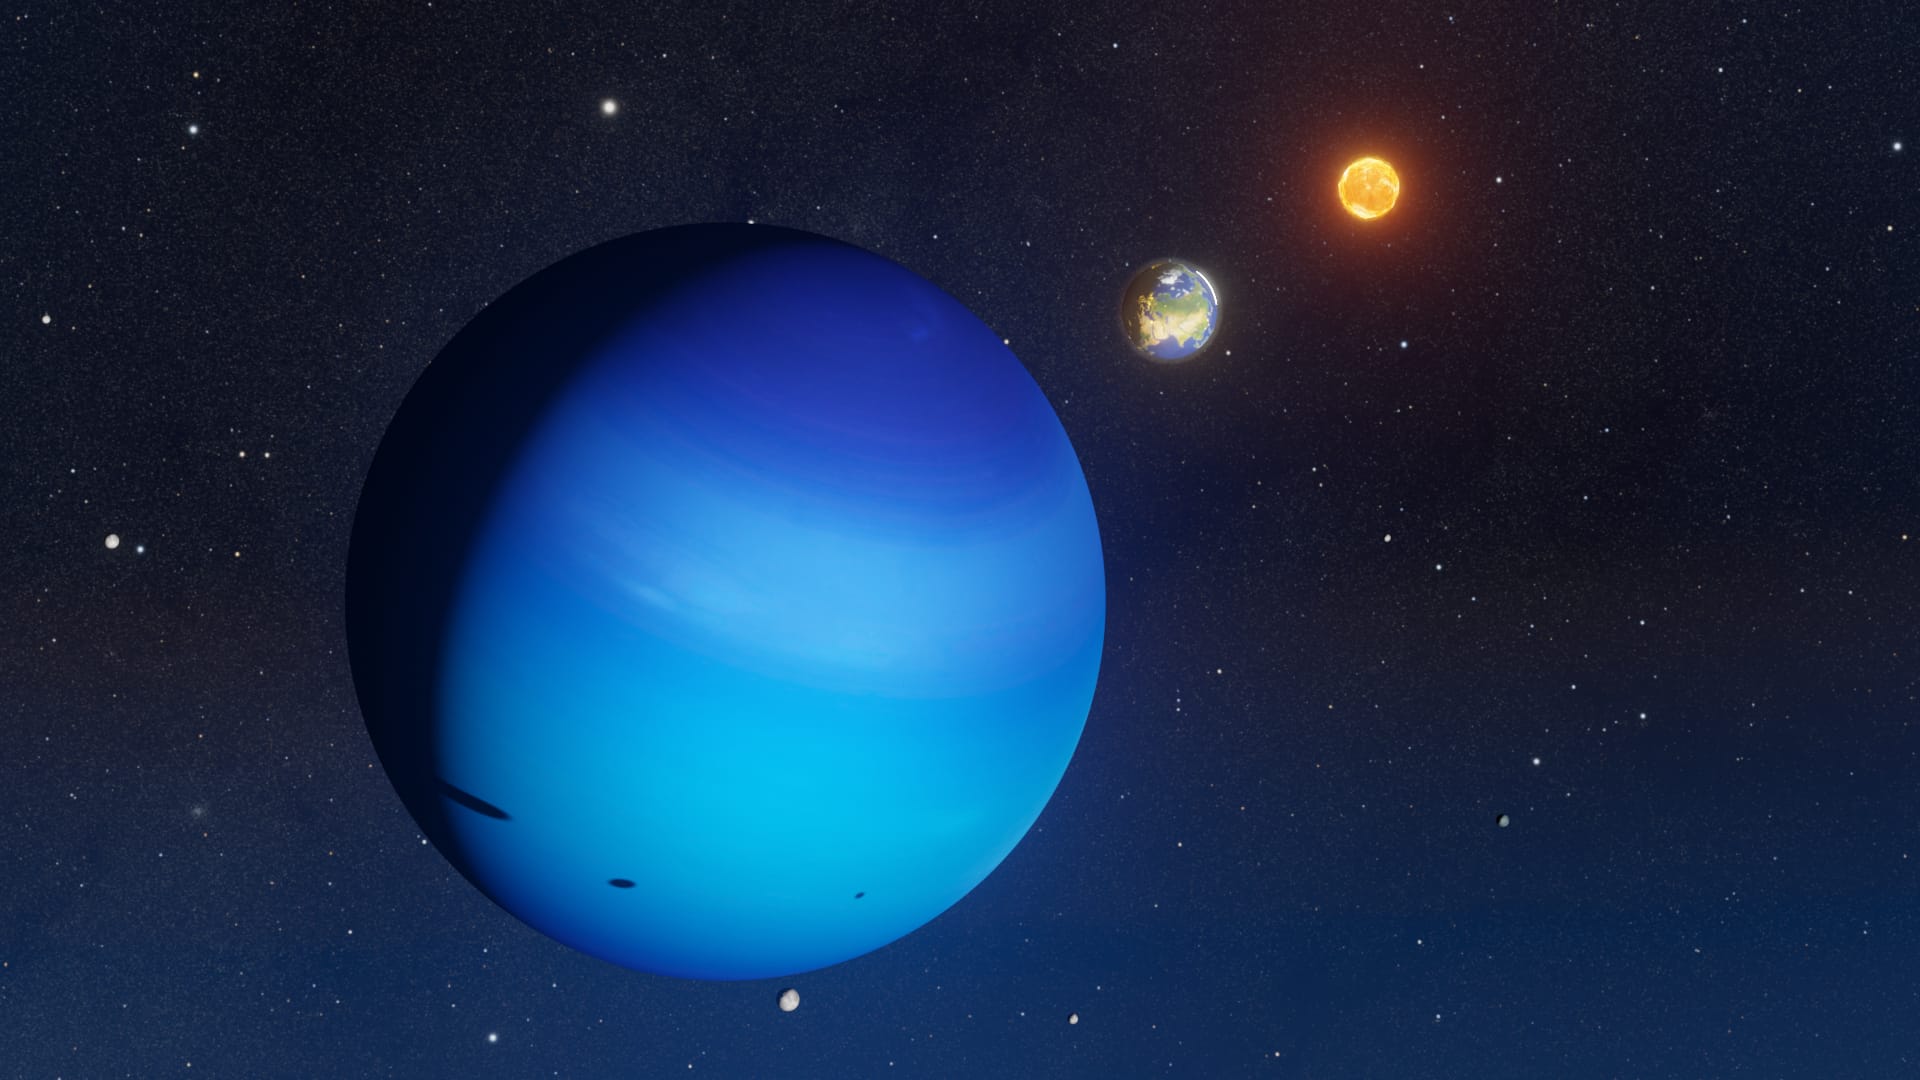 Planet Neptune: Explore the Farthest Planet From the Sun!